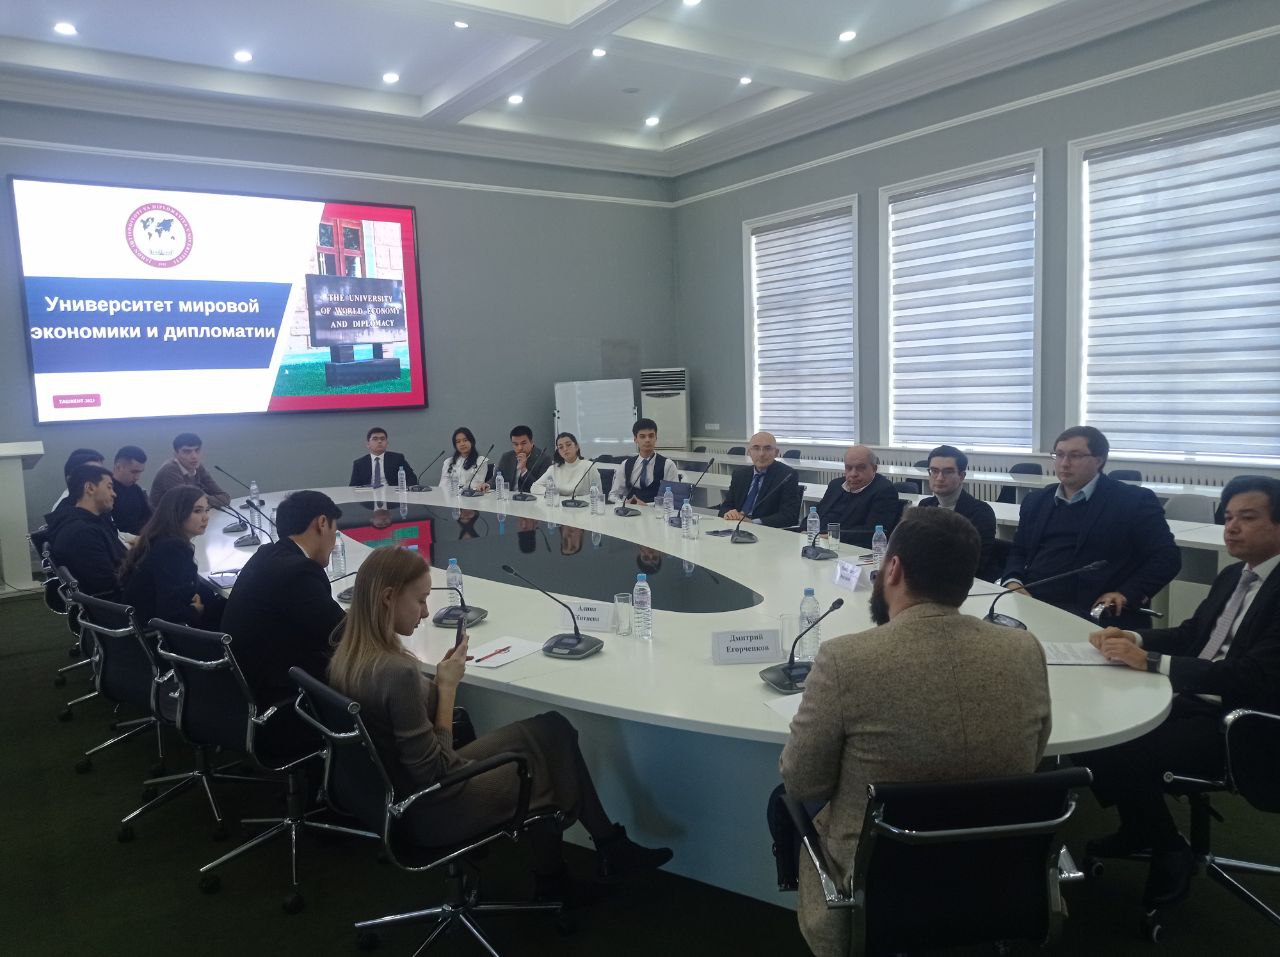 A meeting was held at the University of World Economy and Diplomacy with a group of scientists from the Russian Federation